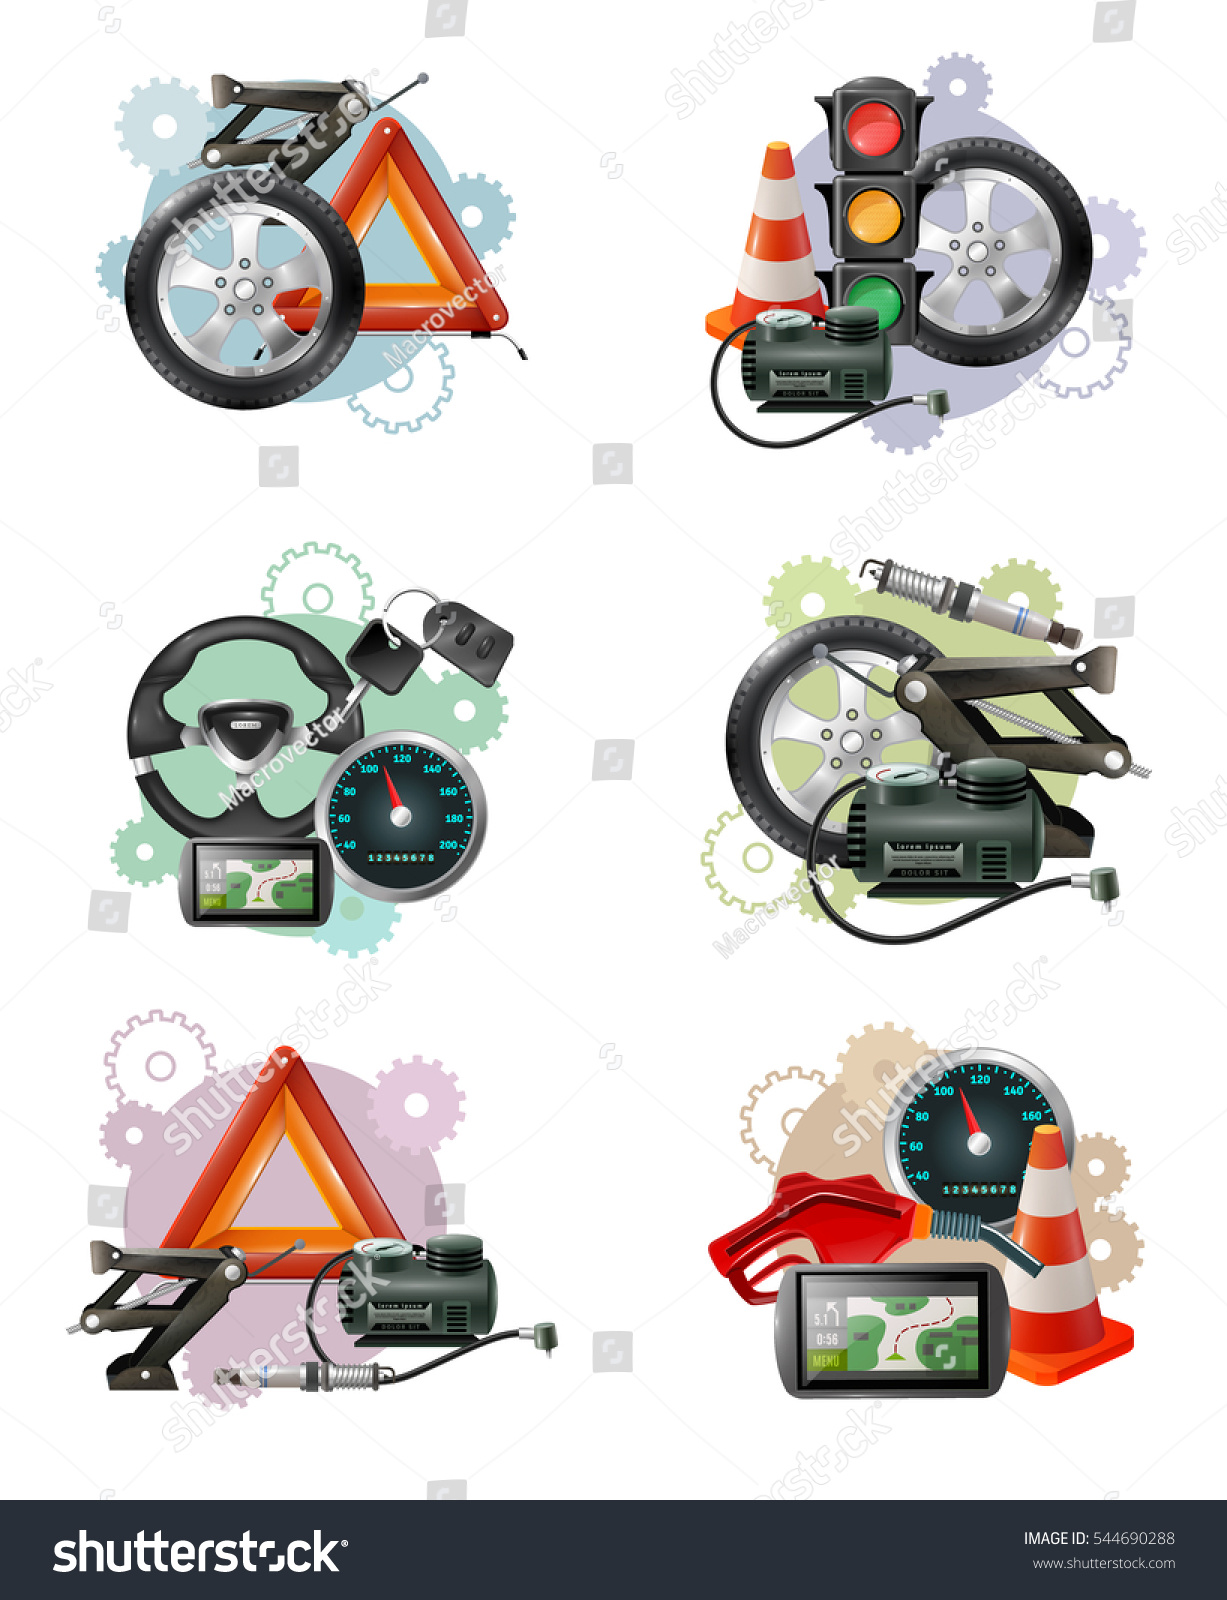 SVG of Car repair and maintenance symbol compositions set with wheels hand screws levelling jacks traffic lights barriers vector illustration svg